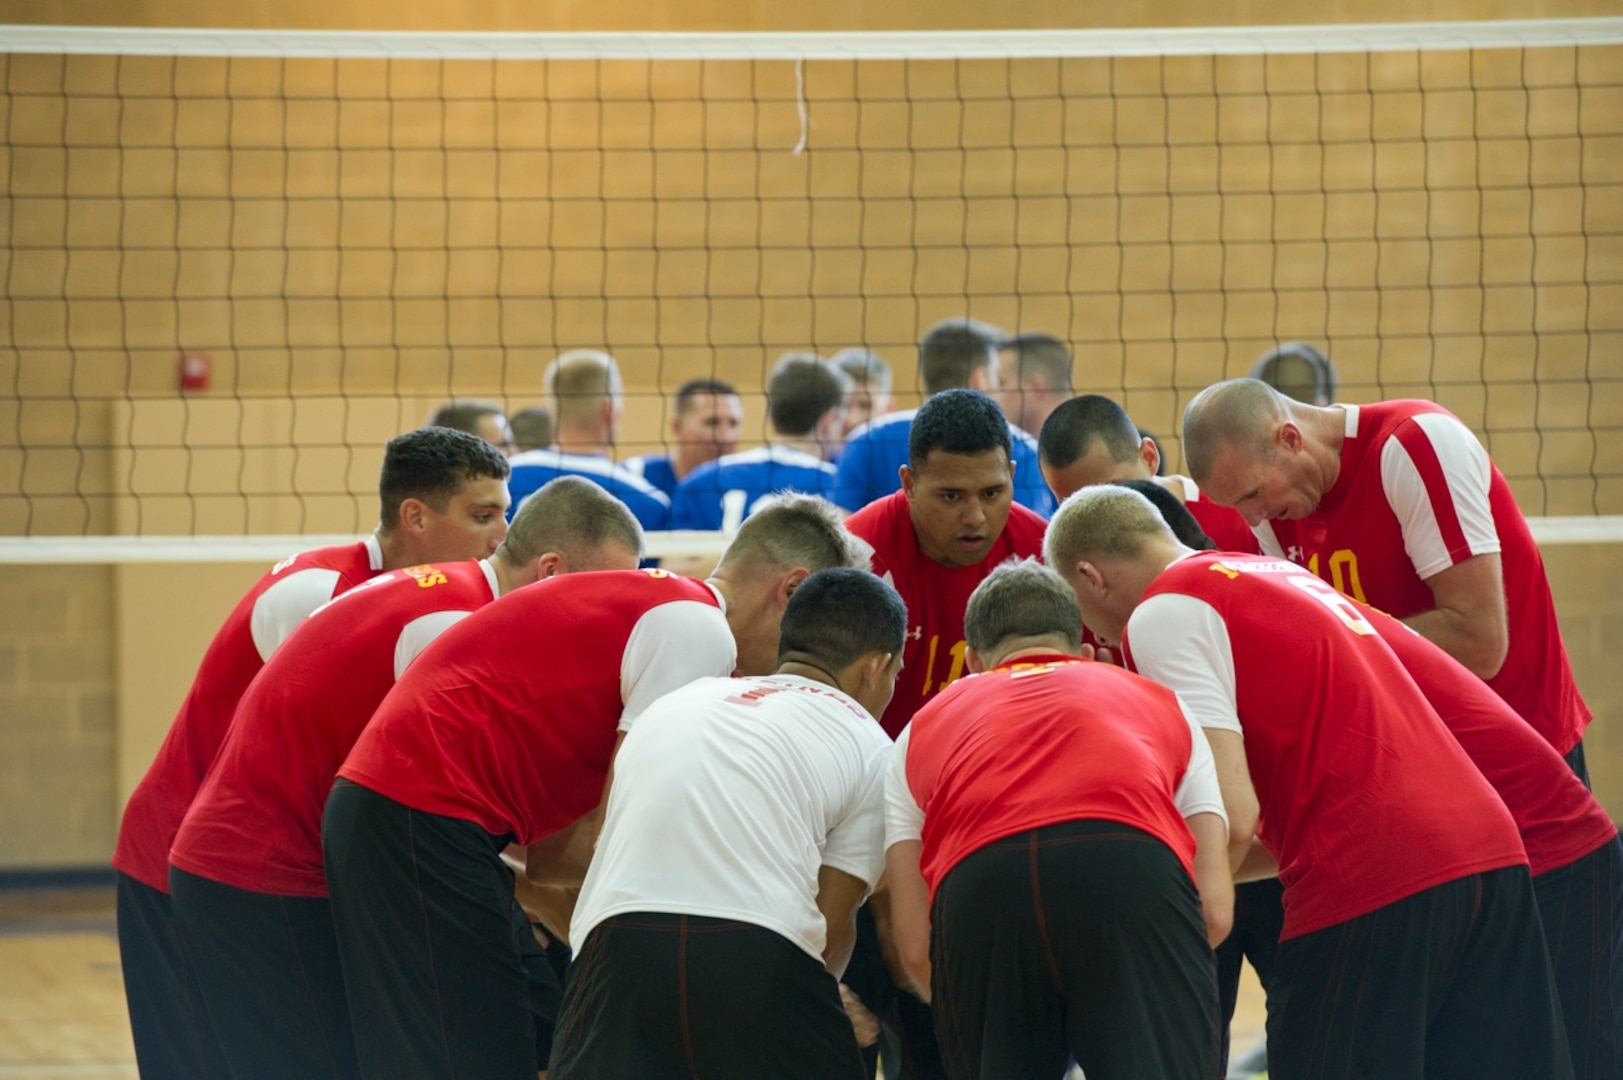 LCpl Seanoa Fuifatu (USMC #11 Camp LeJeune, NC) totally focused in the team's huddle against the Air Force on day one.  